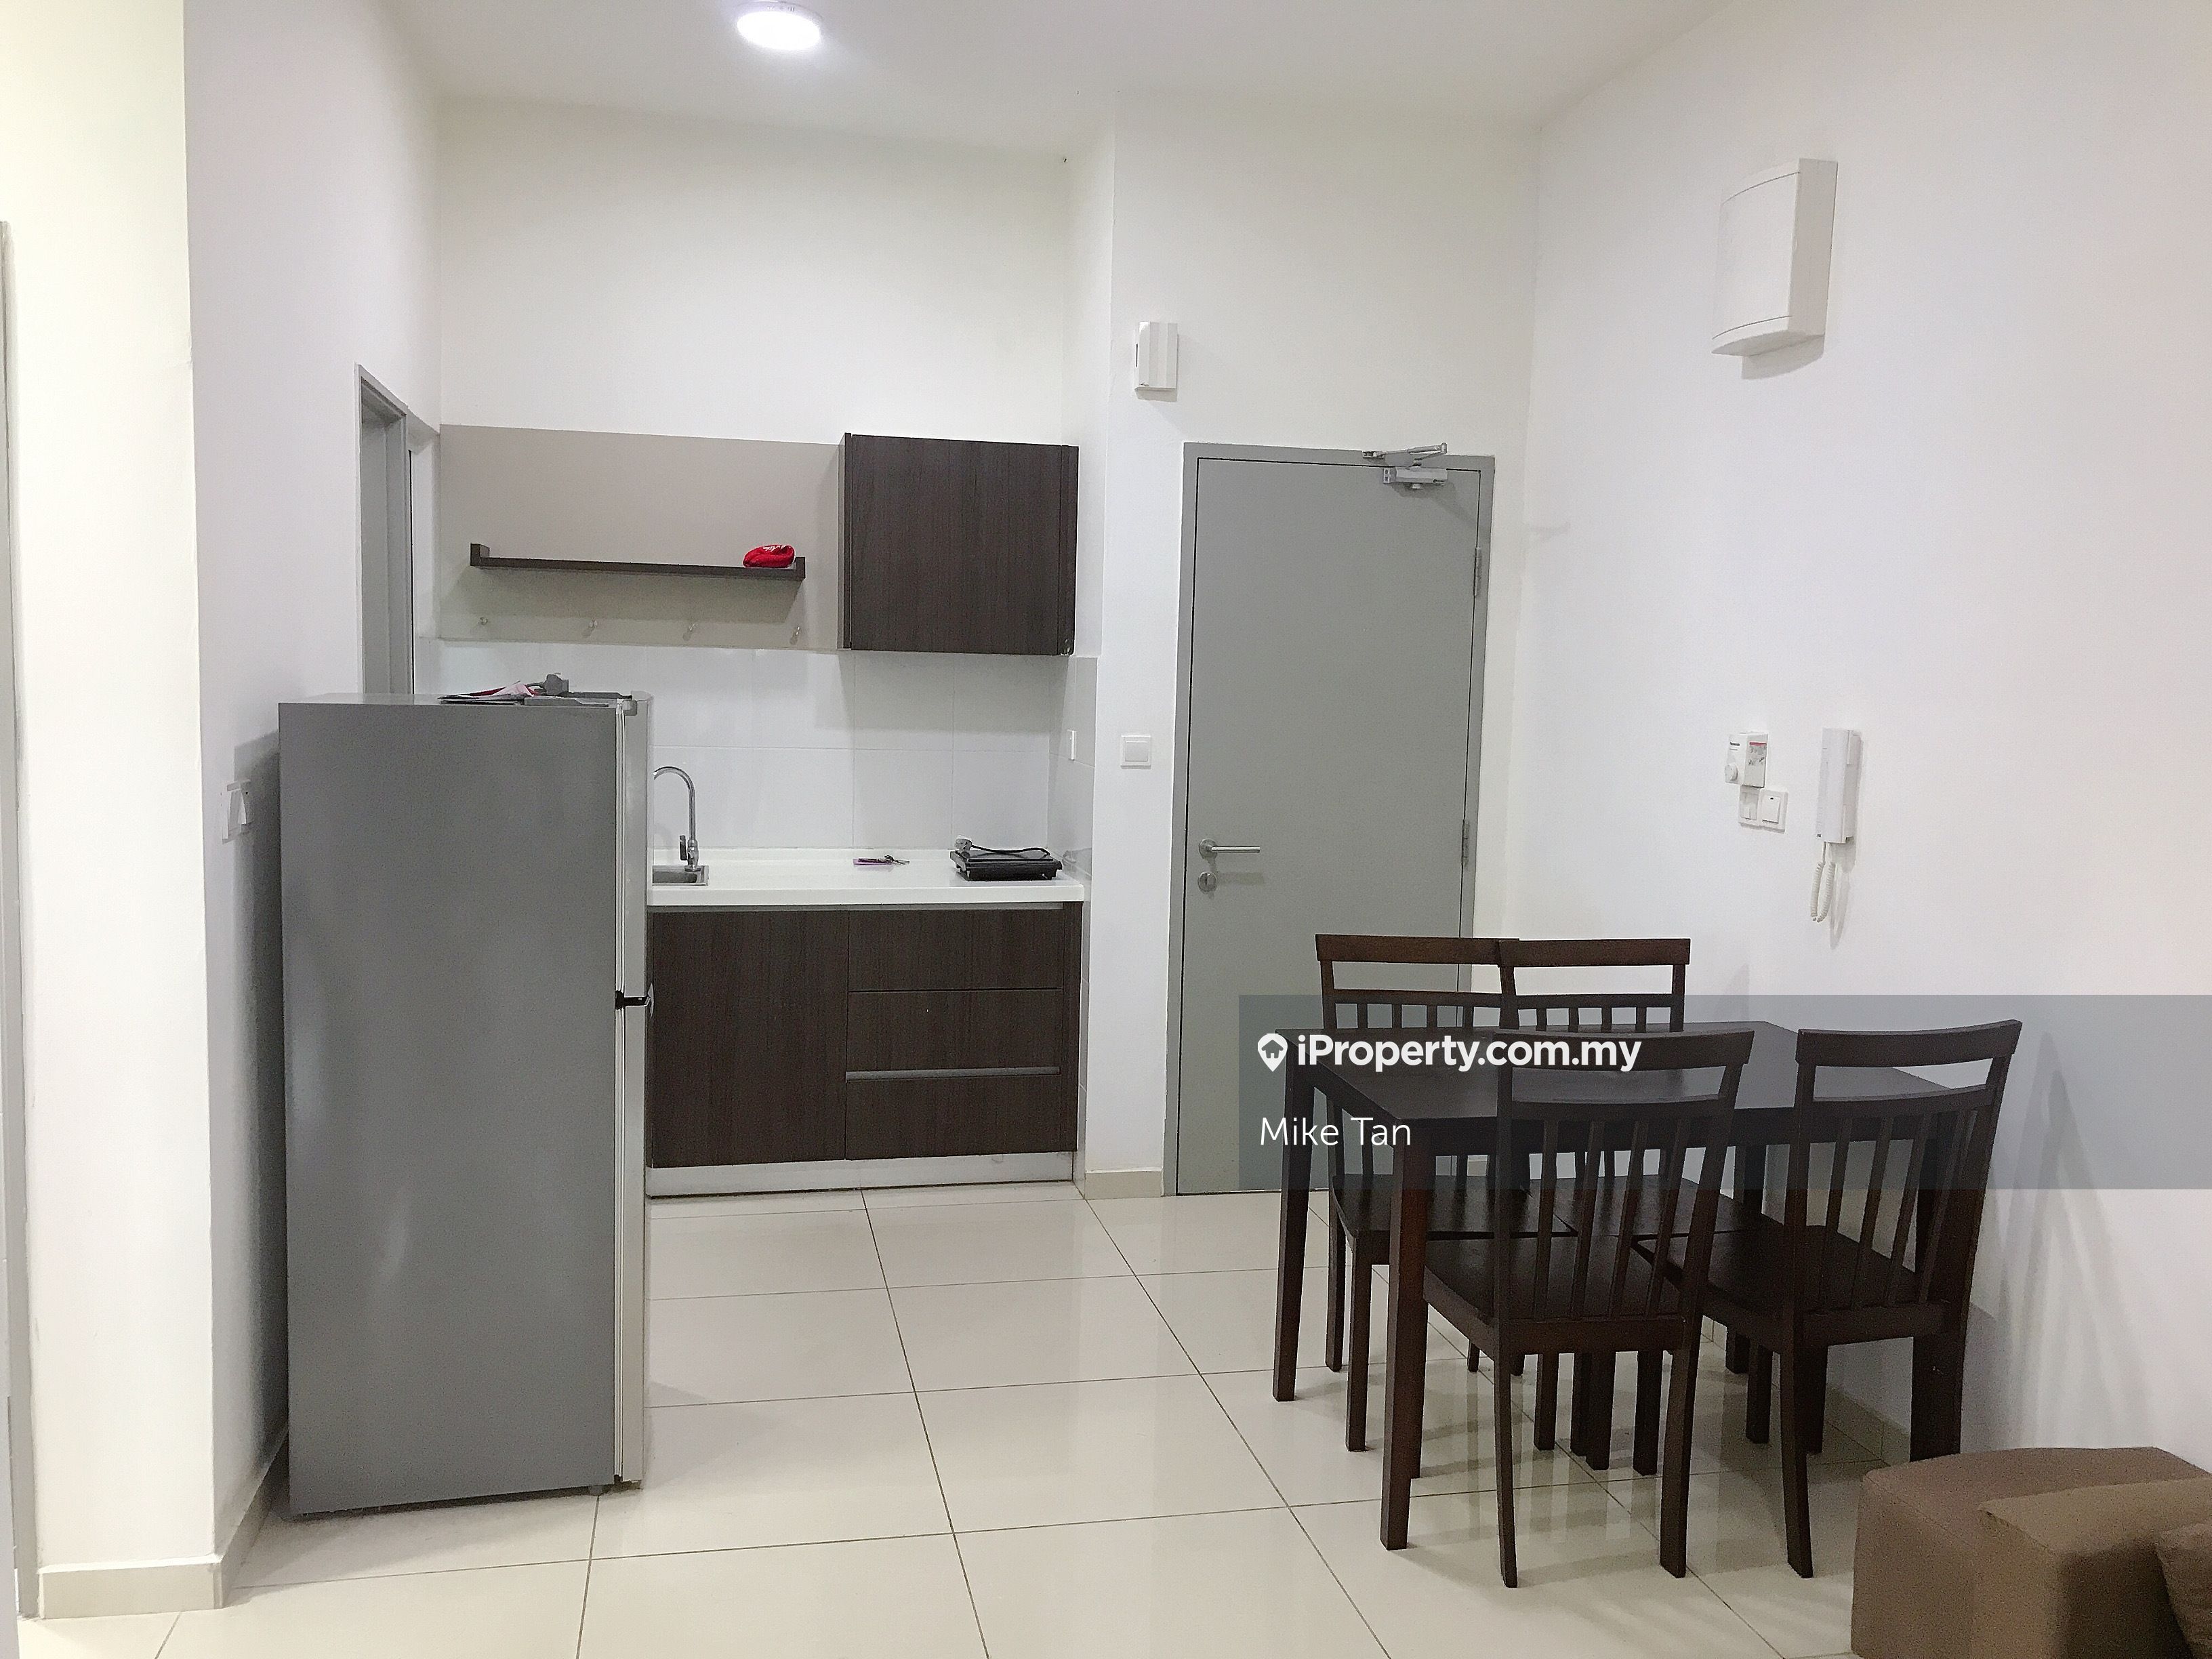 Mesahill Serviced Residence 2 bedrooms for rent in Nilai, Negeri ...